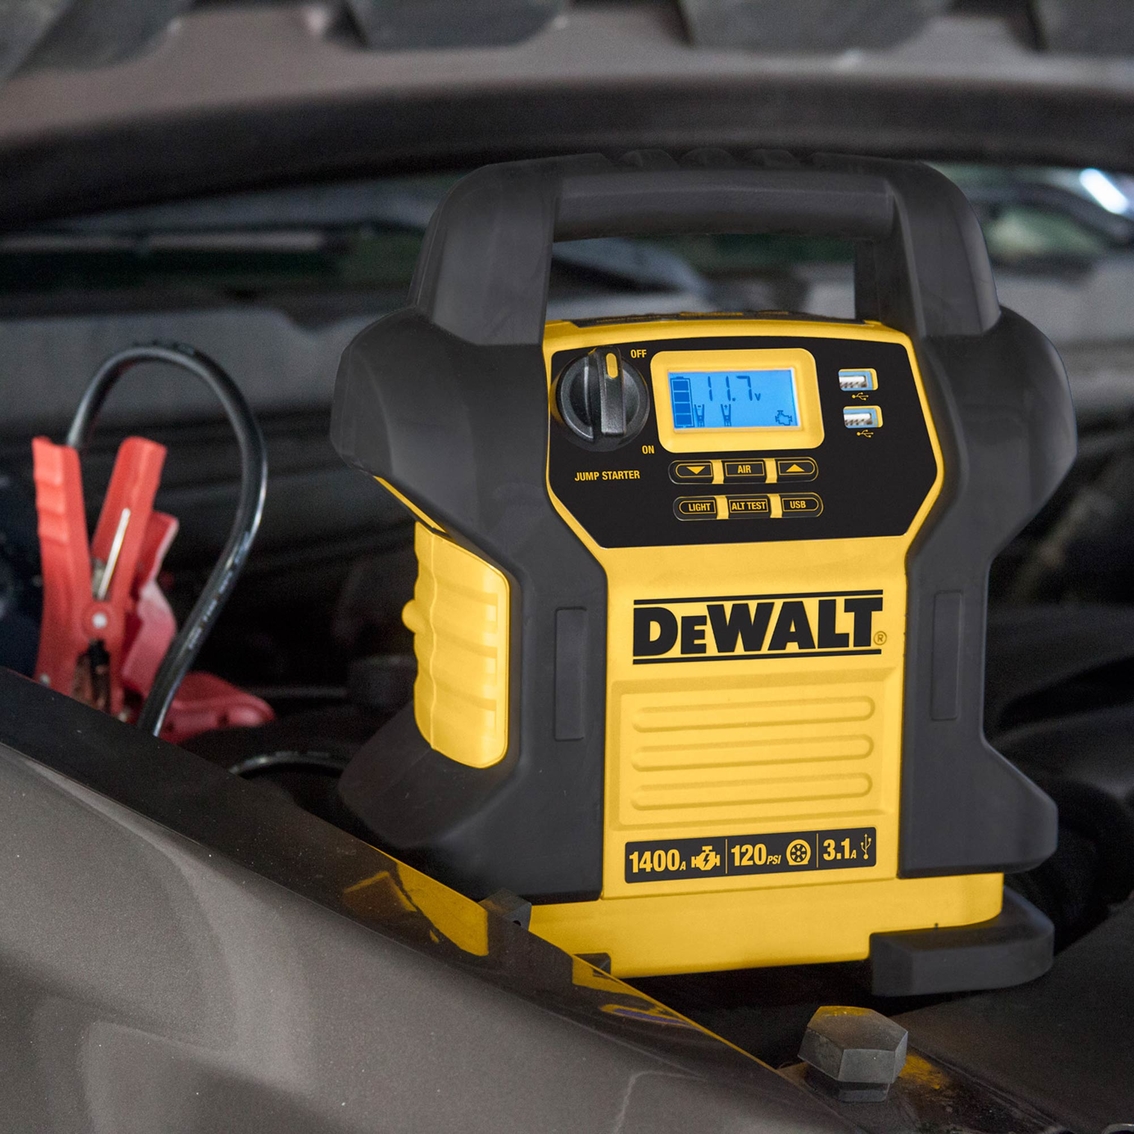 Will leaving a car jump starter constantly plugged in damage it,  specifically a Dewalt 1400 Peak amp charger? - Quora